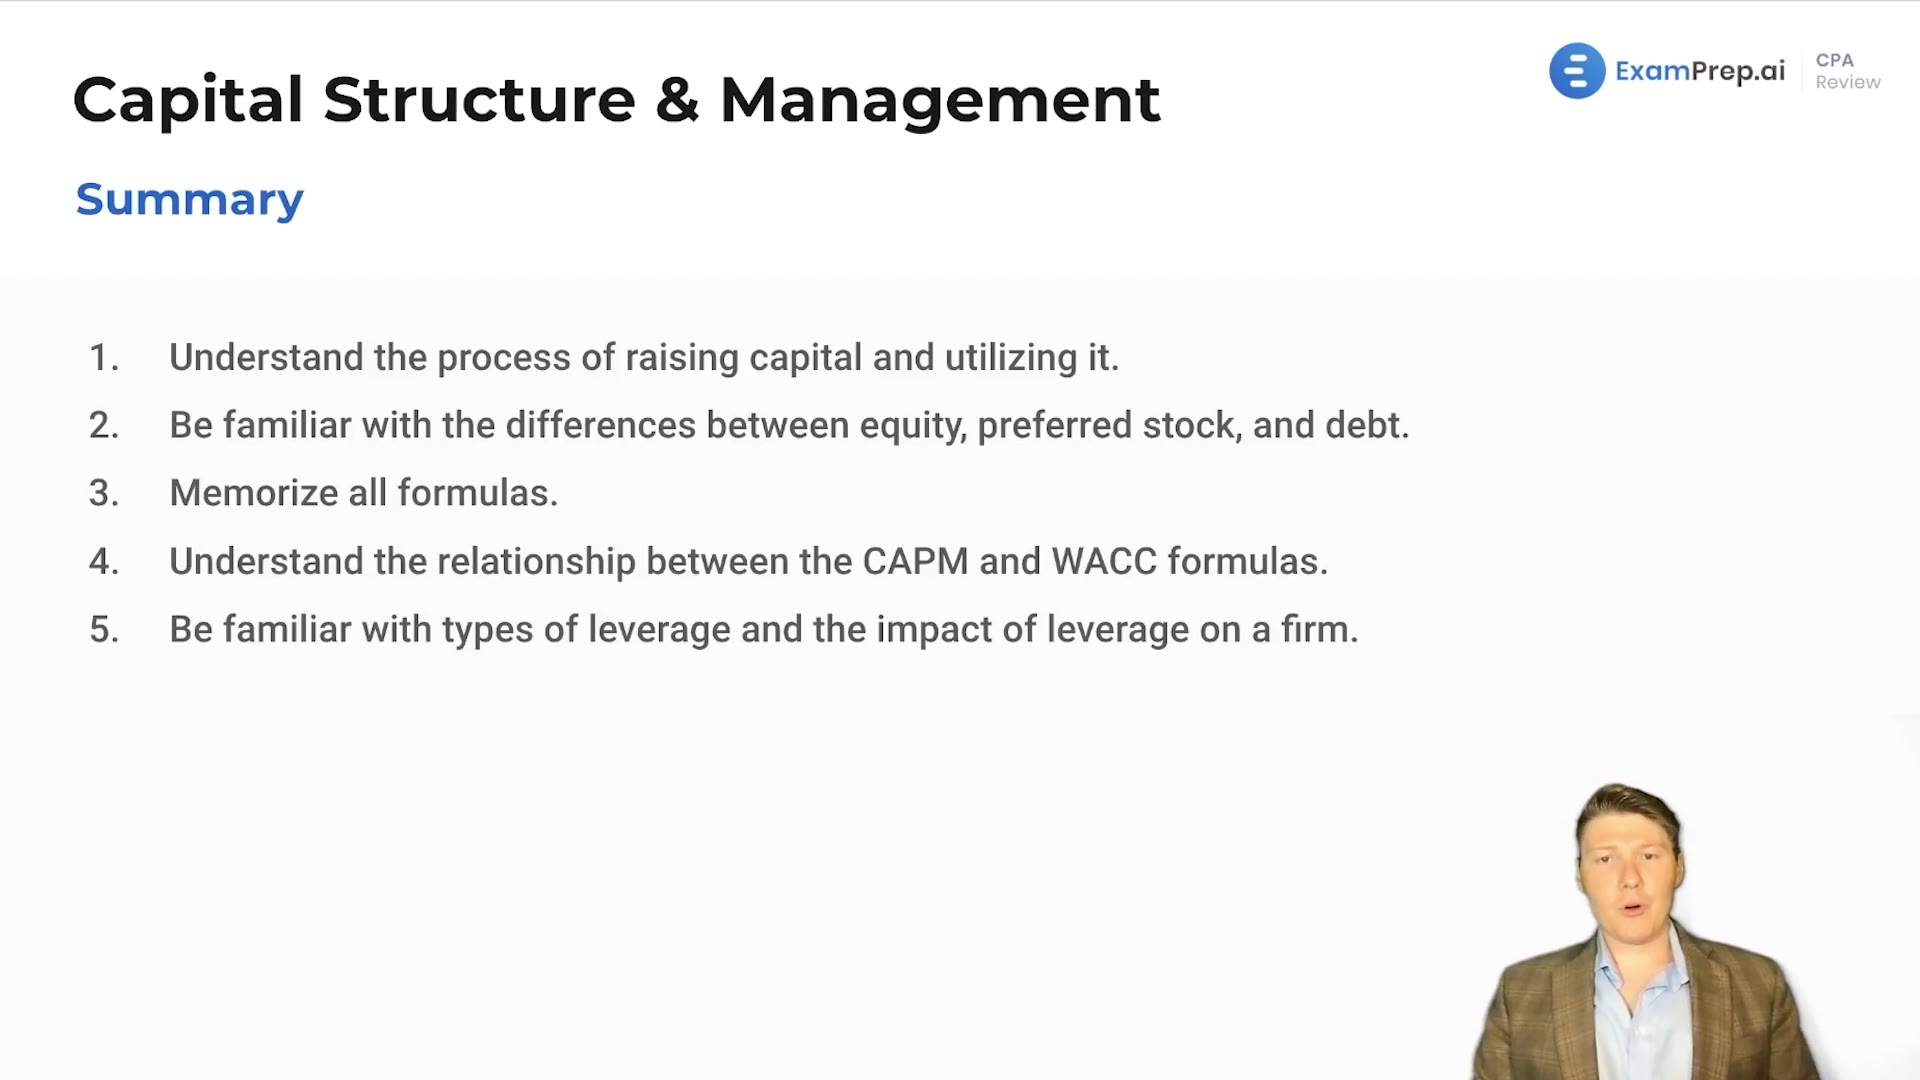 Capital Structure and Management Summary lesson thumbnail